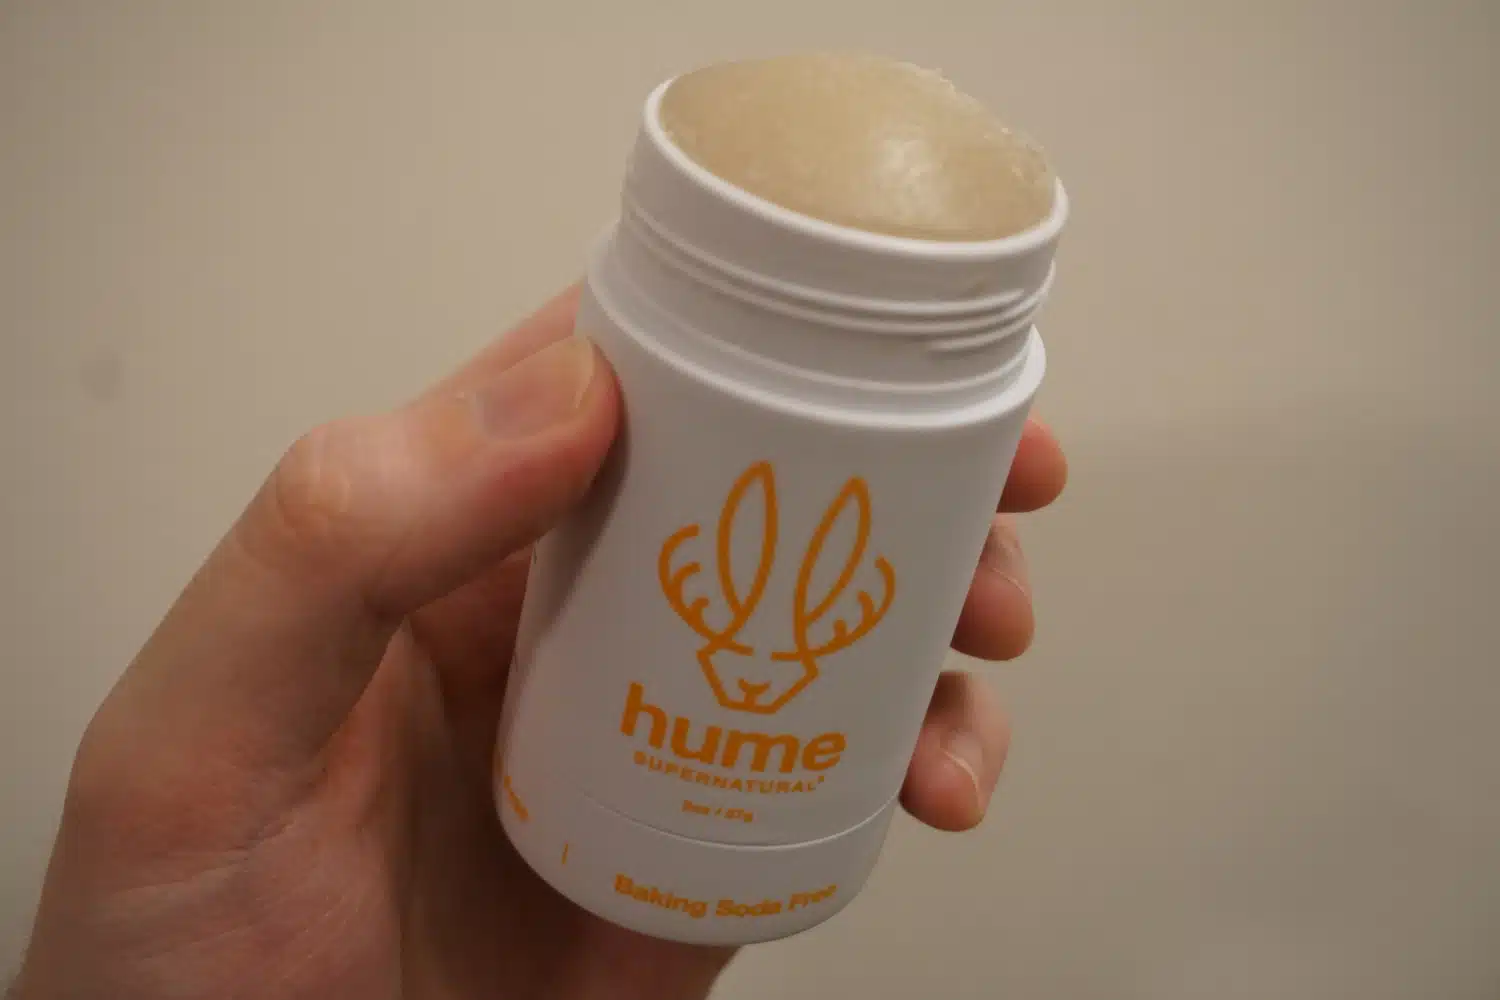 Hume deodorant without cap